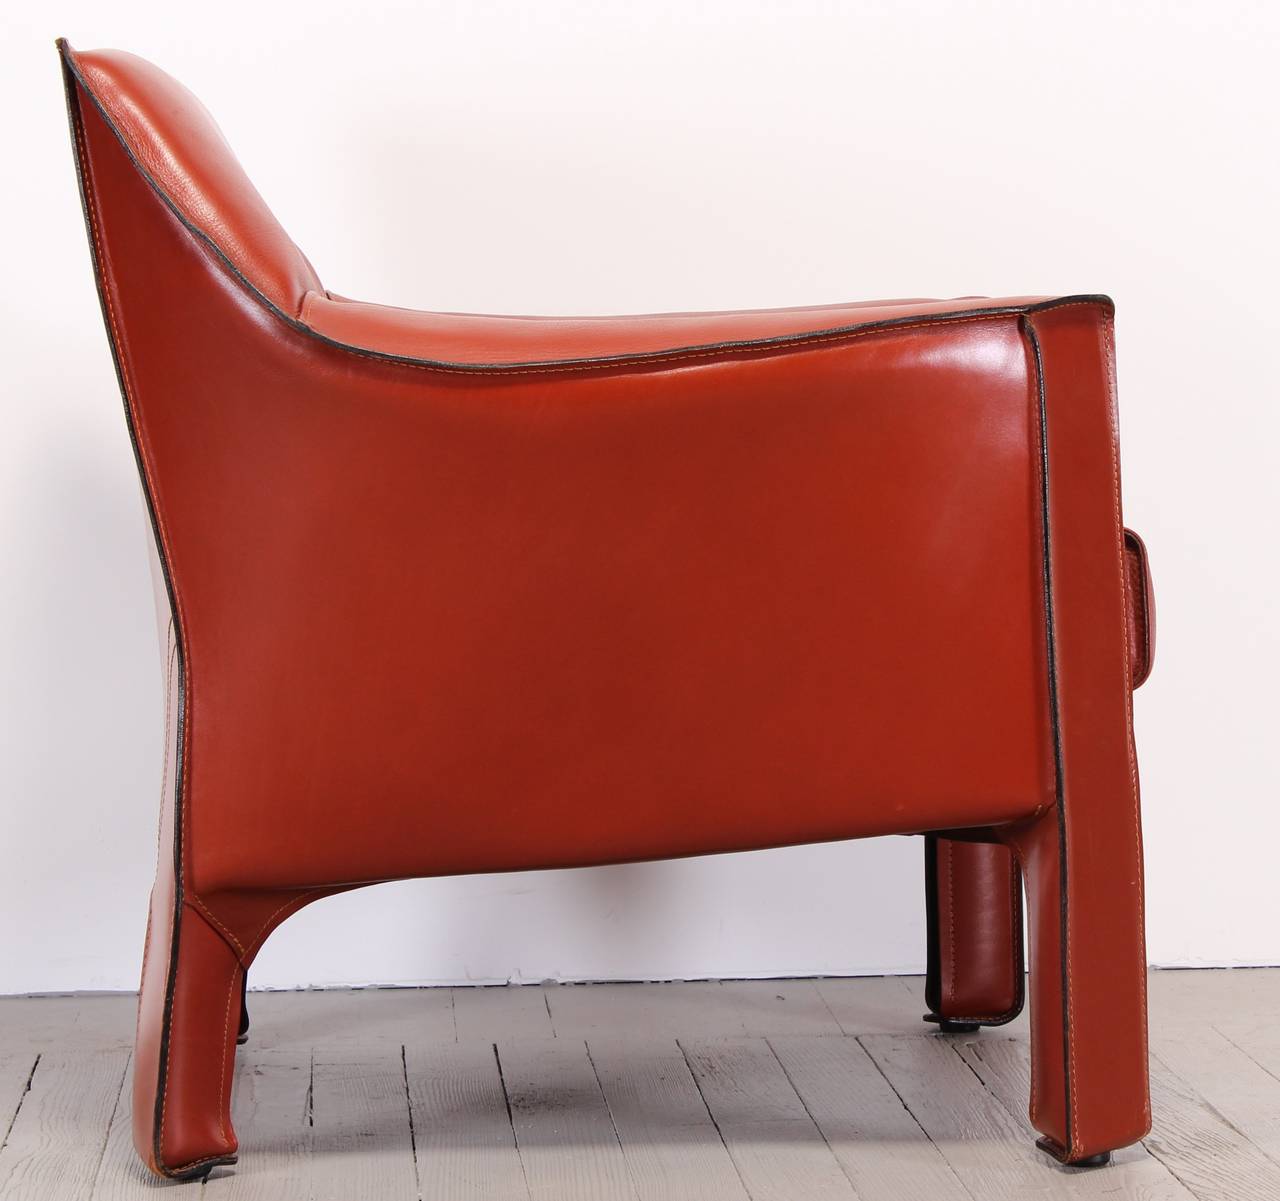 A great 415 cab chair by Mario Bellini for Cassina in soft Hermes toned reddish orange leather.